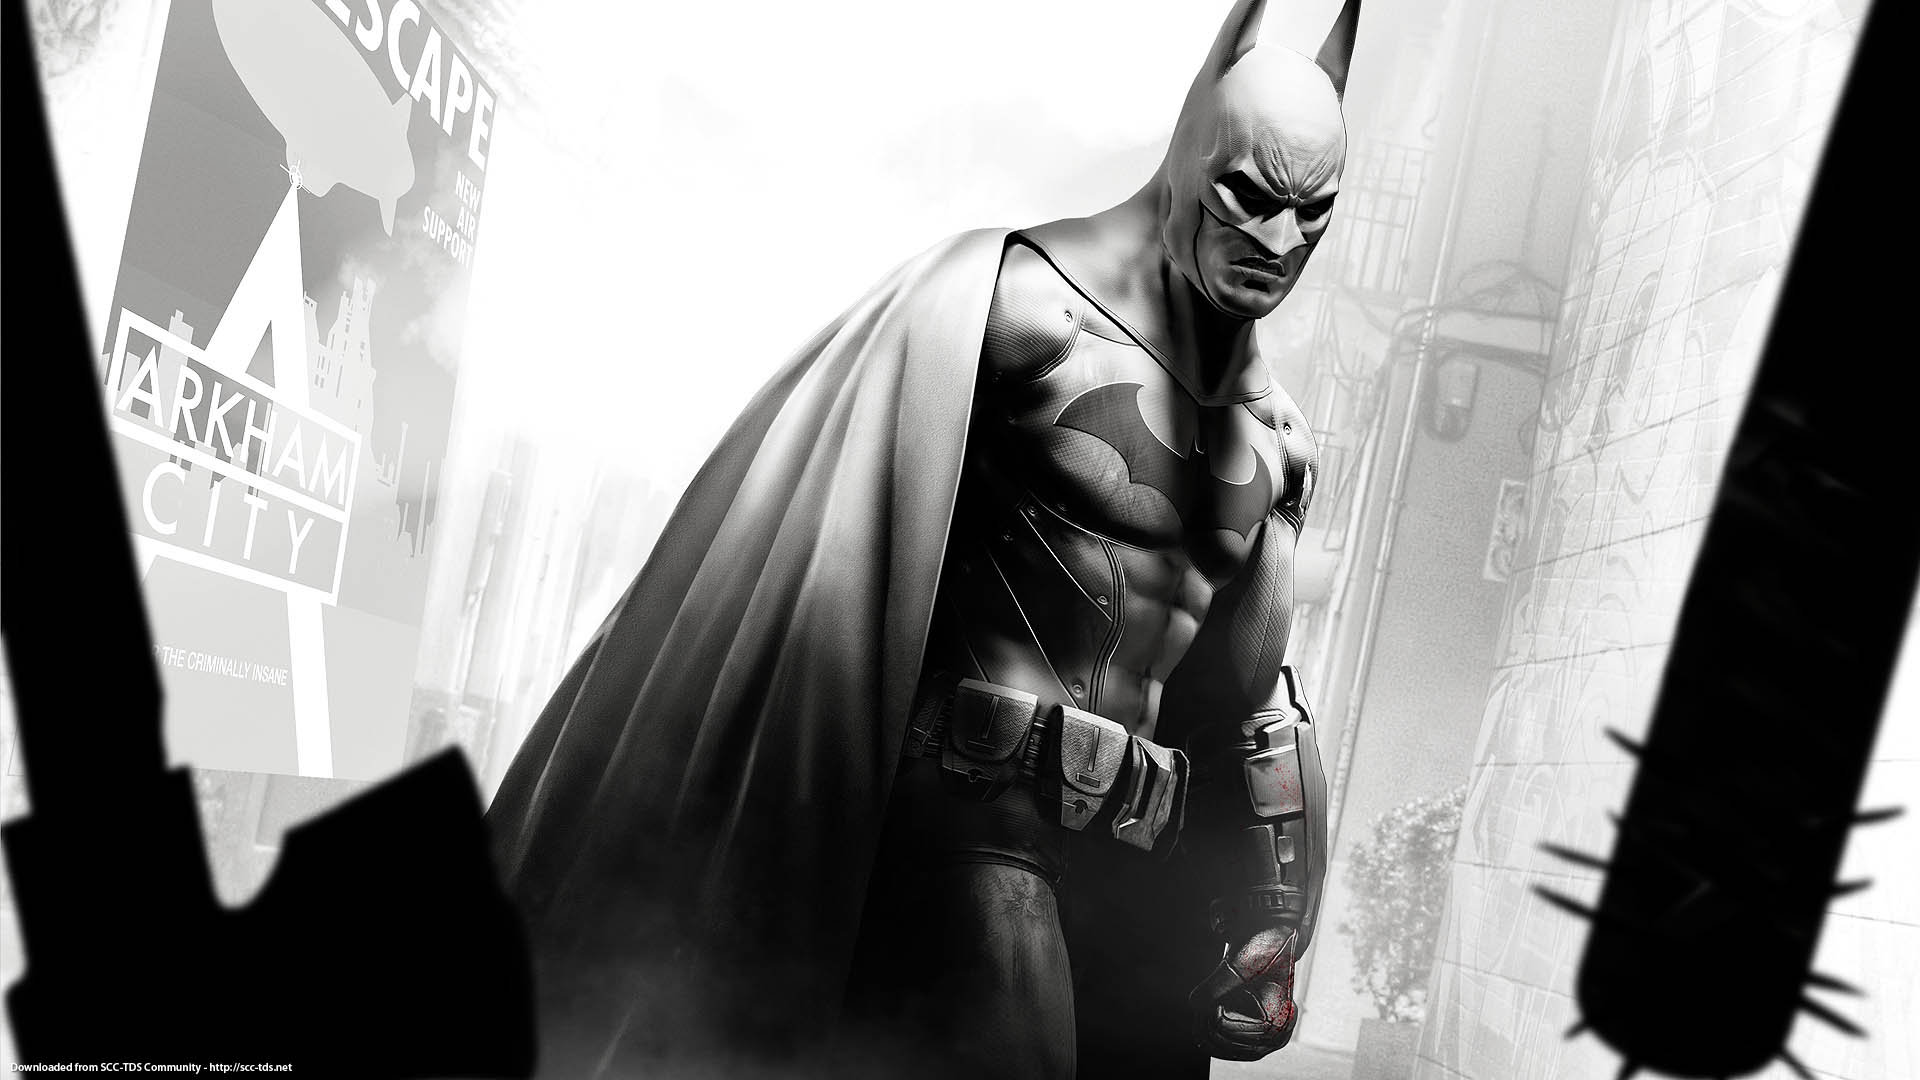 New Batman game to be revealed next week The Anxious